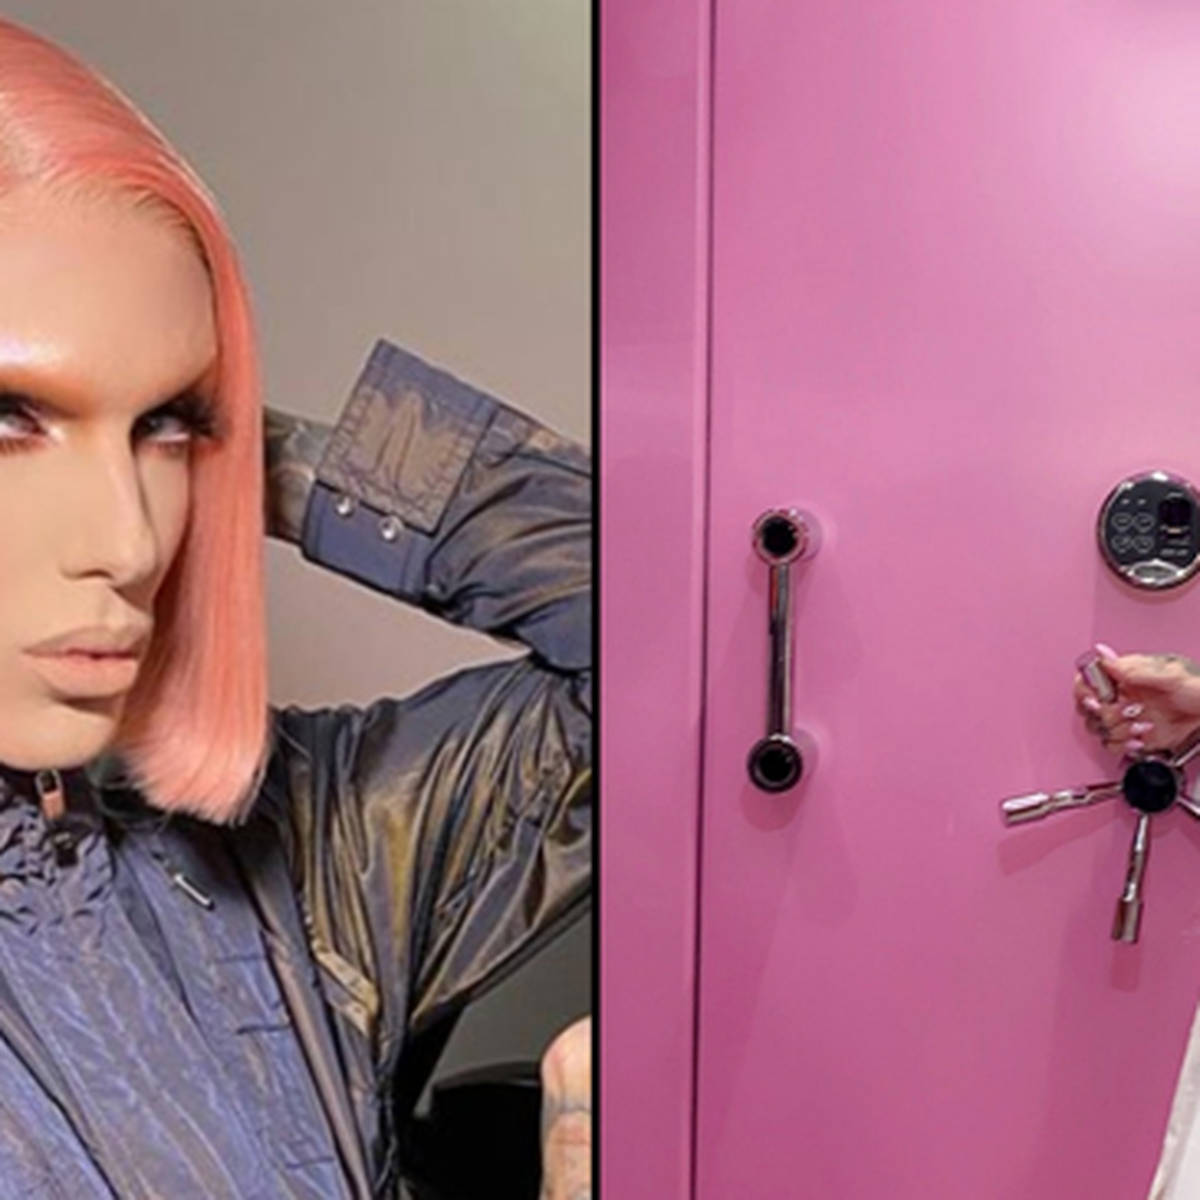 Jeffree Star reveals plans for bigger and better pink vault in new